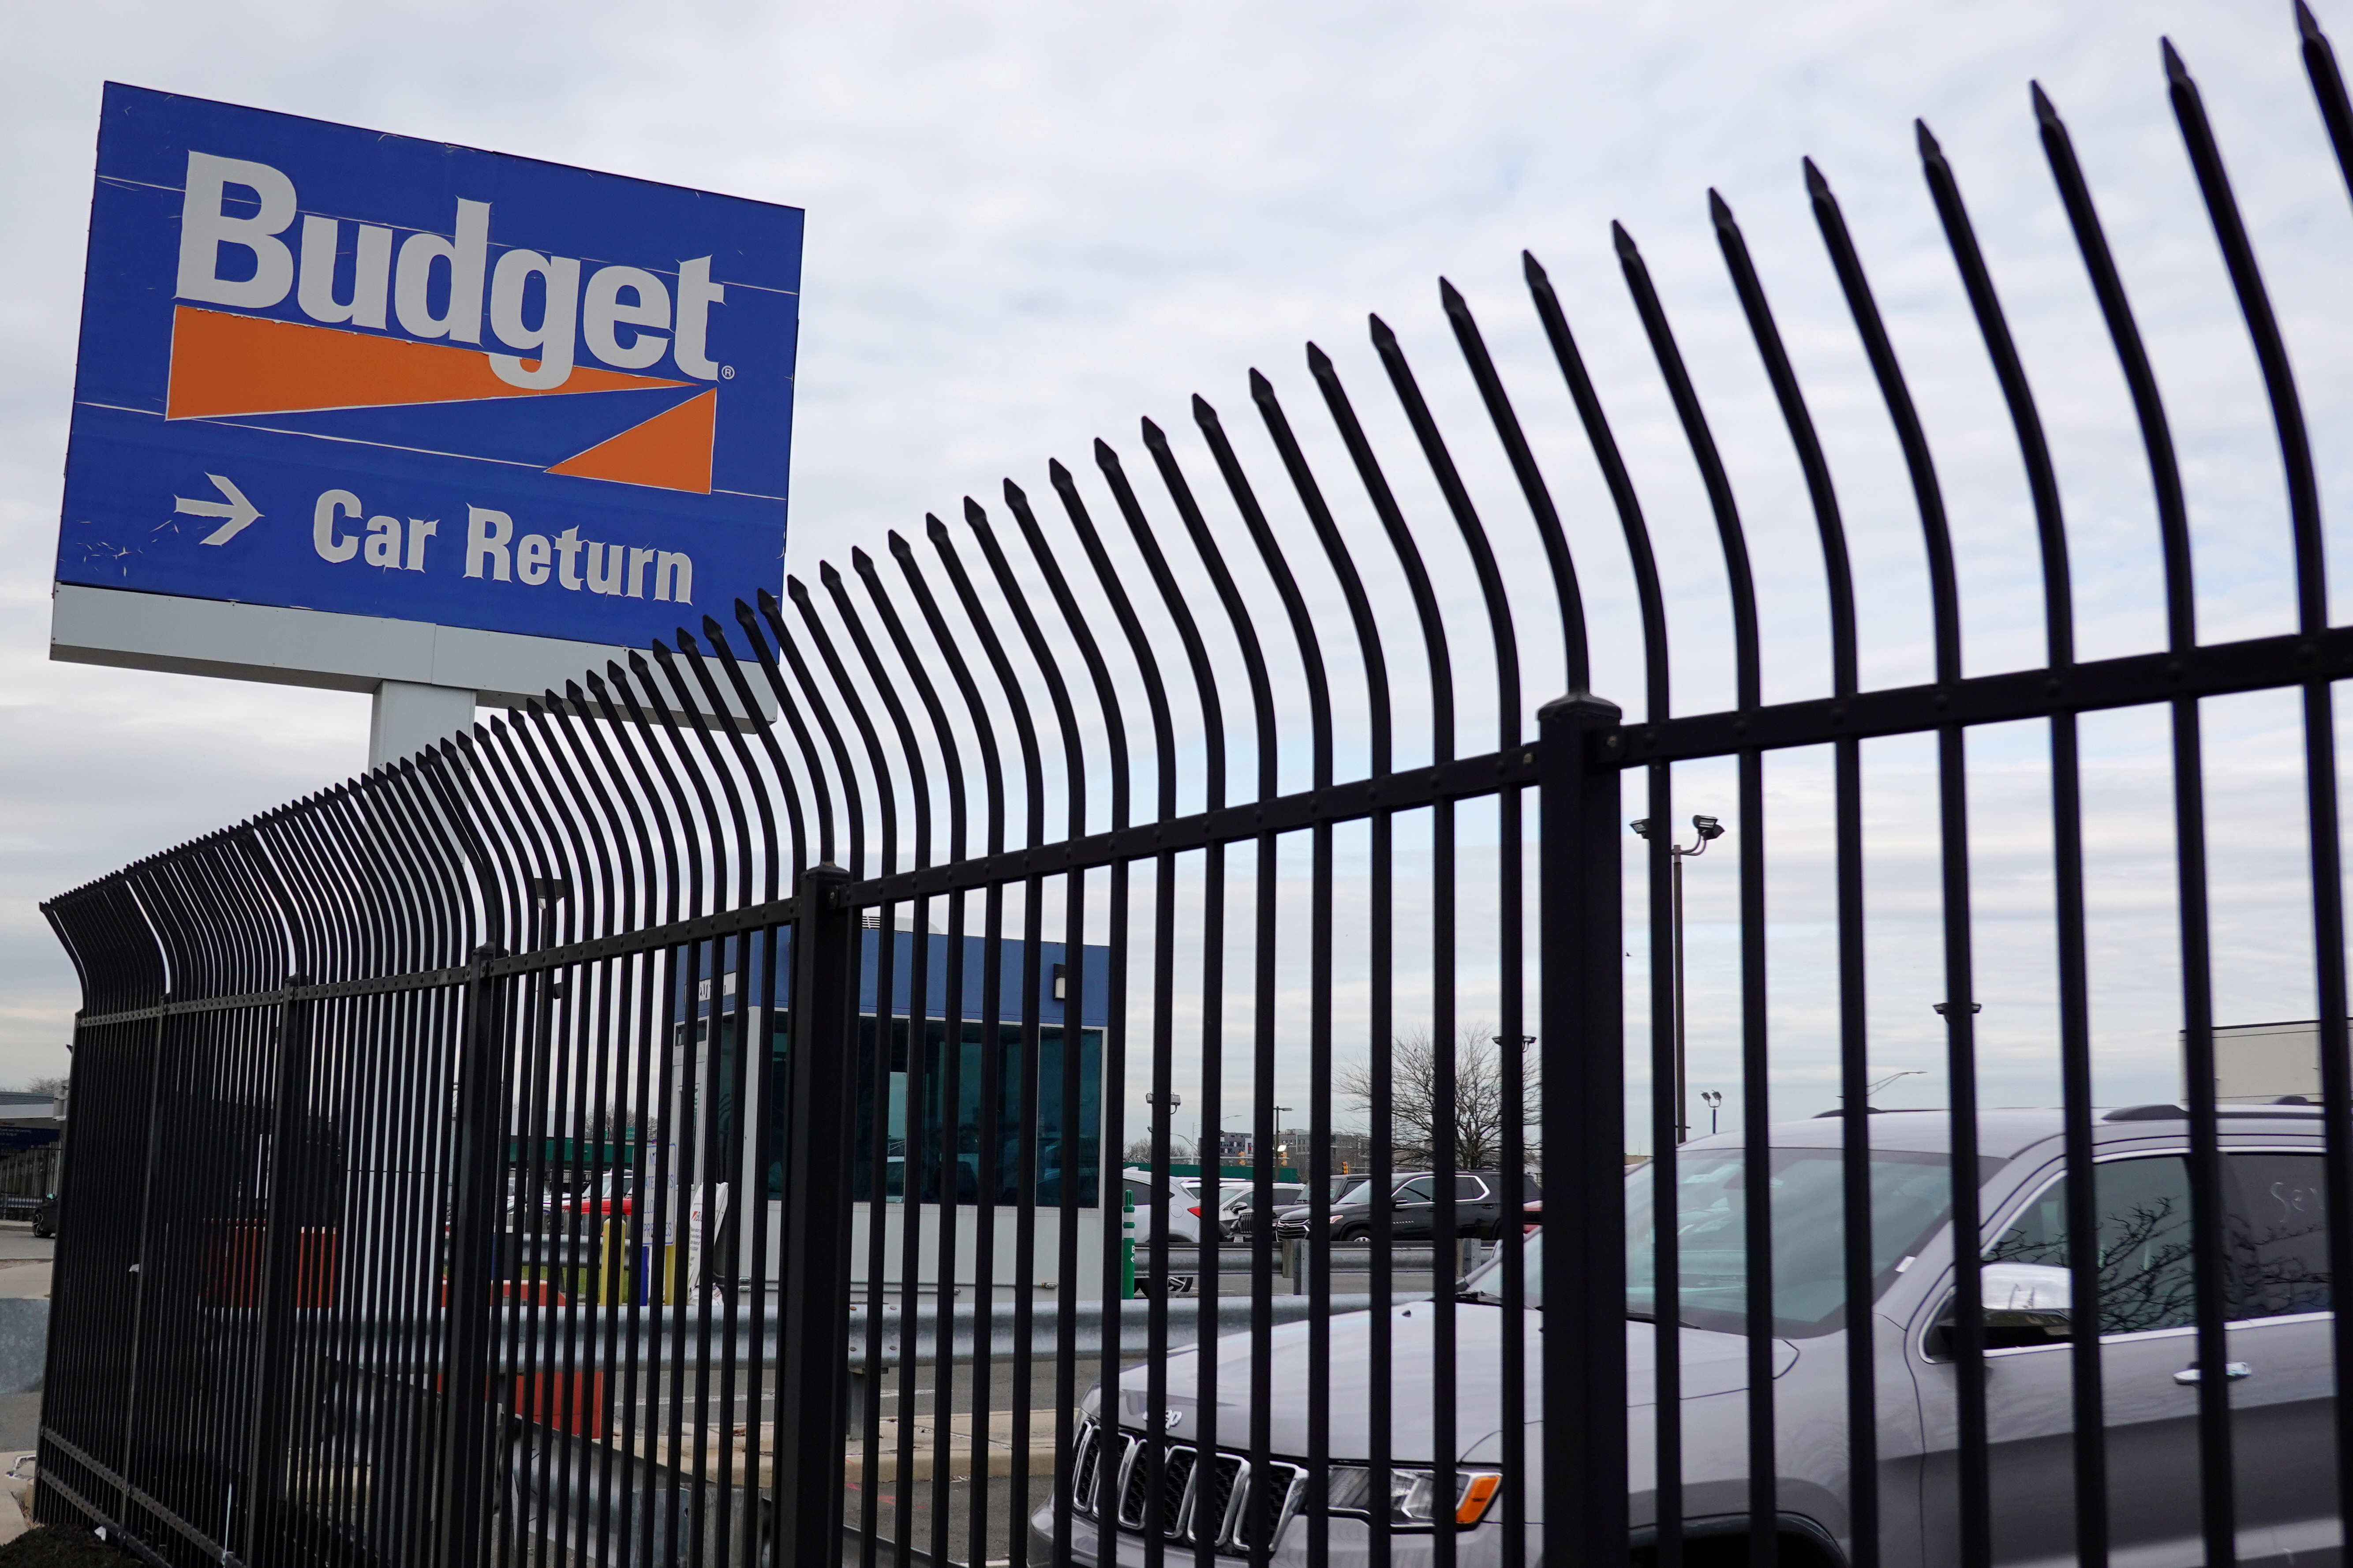 Budget rental car signage is seen at John F. Kennedy International Airport in Queens, New York City